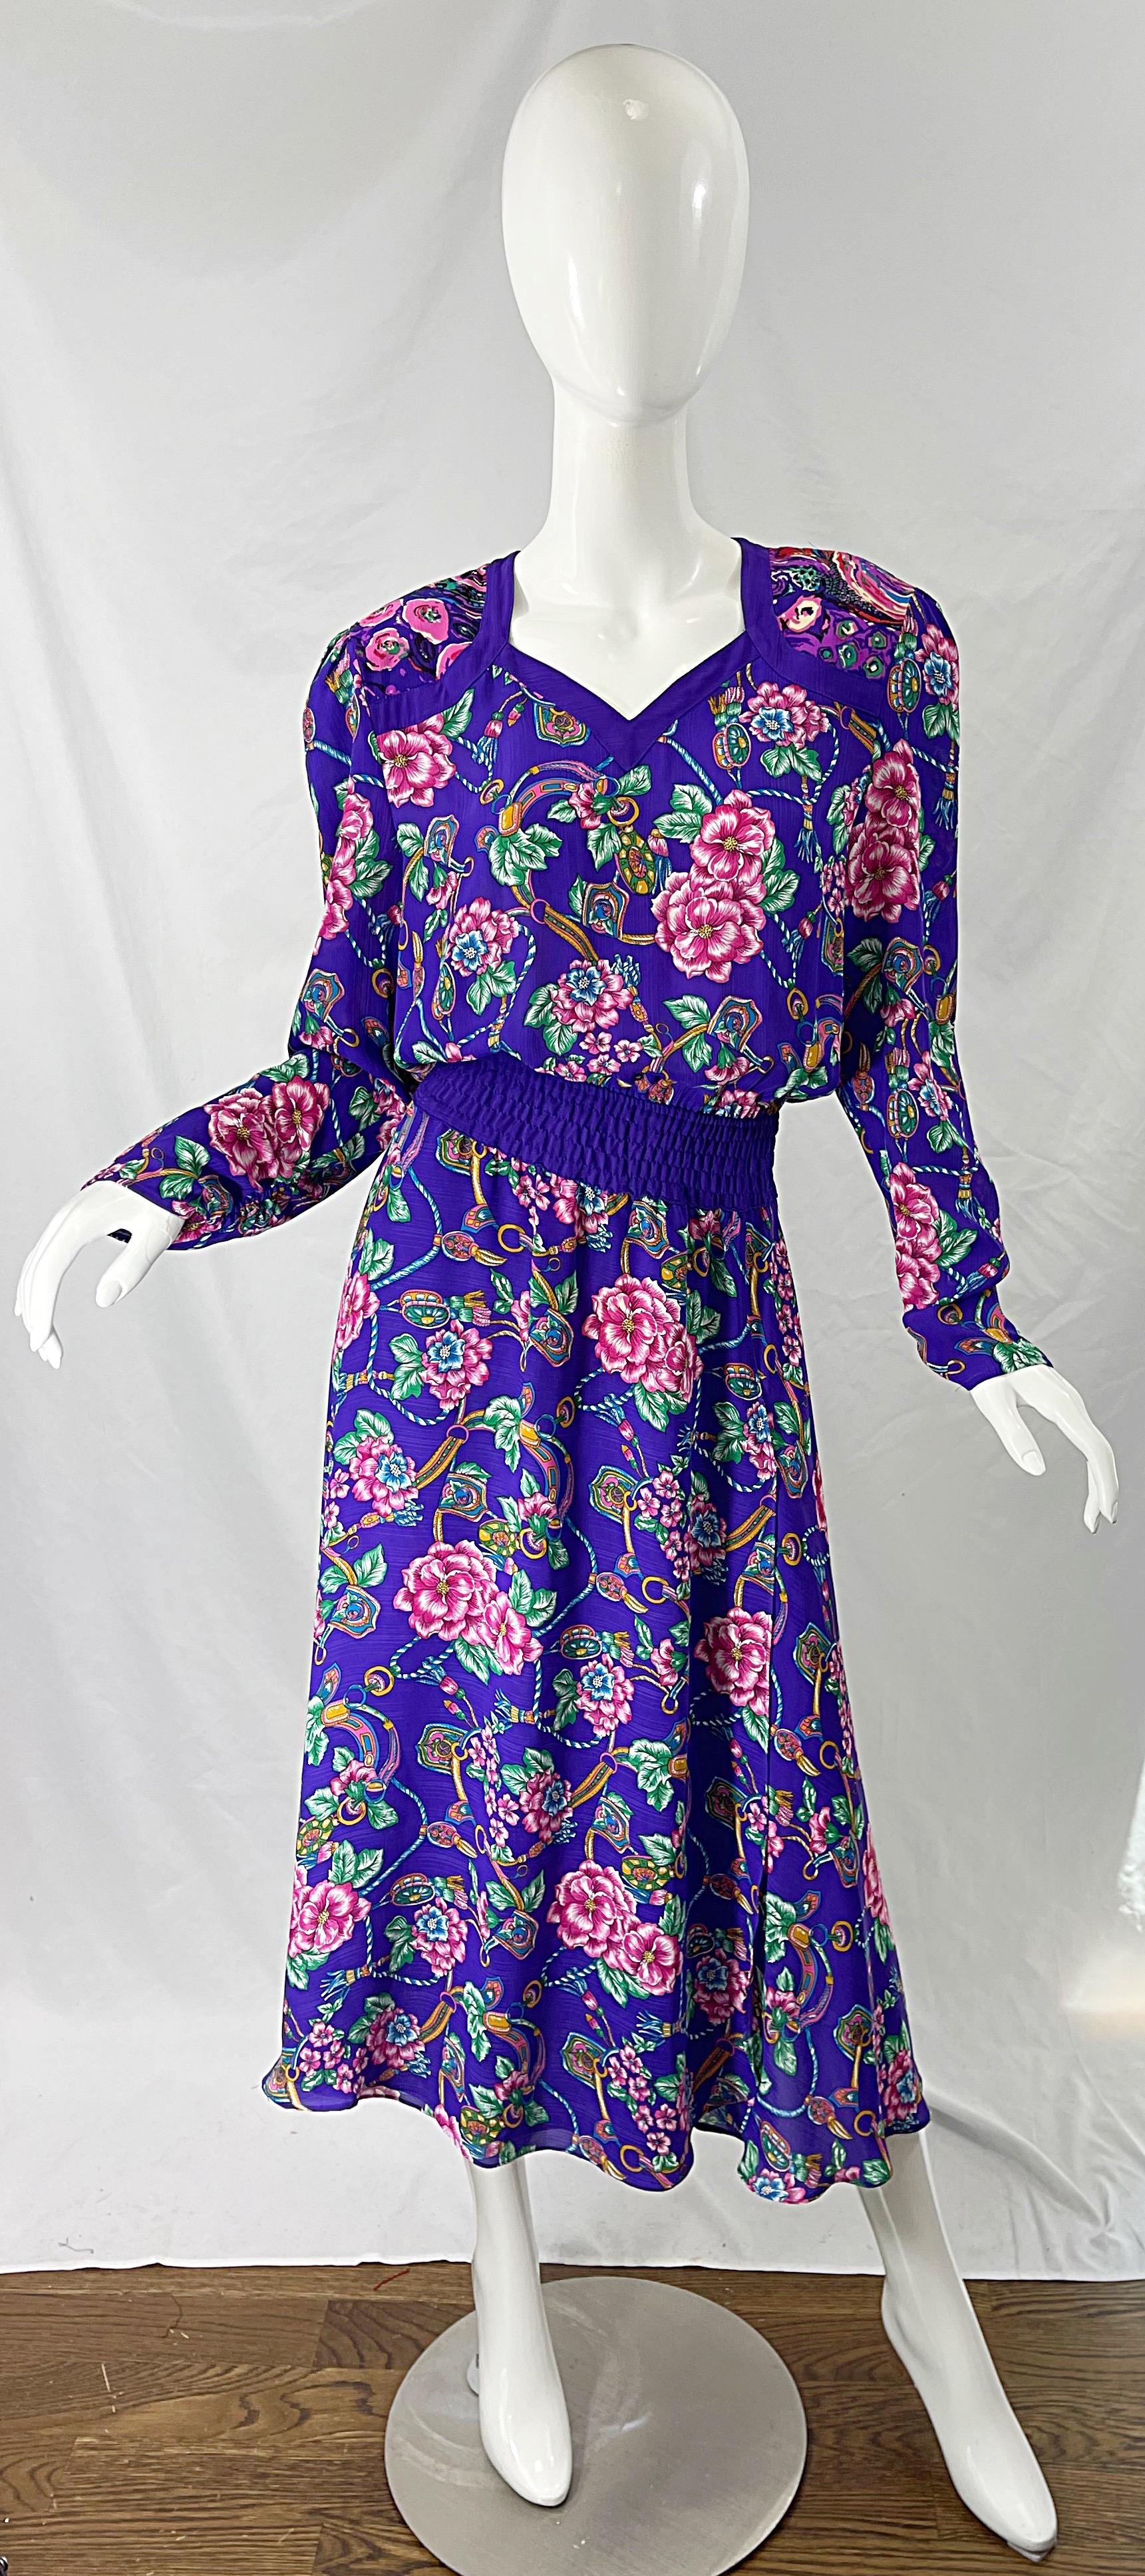 Chic 1980s DIANE FREIS purple flower and jewel printed long sleeve midi dress ! Features a beautiful purple background color with flowers ( maybe hibiscus ) in pink, with jewel prints in turquoise blue, gold, emerald green, and pink throughout.